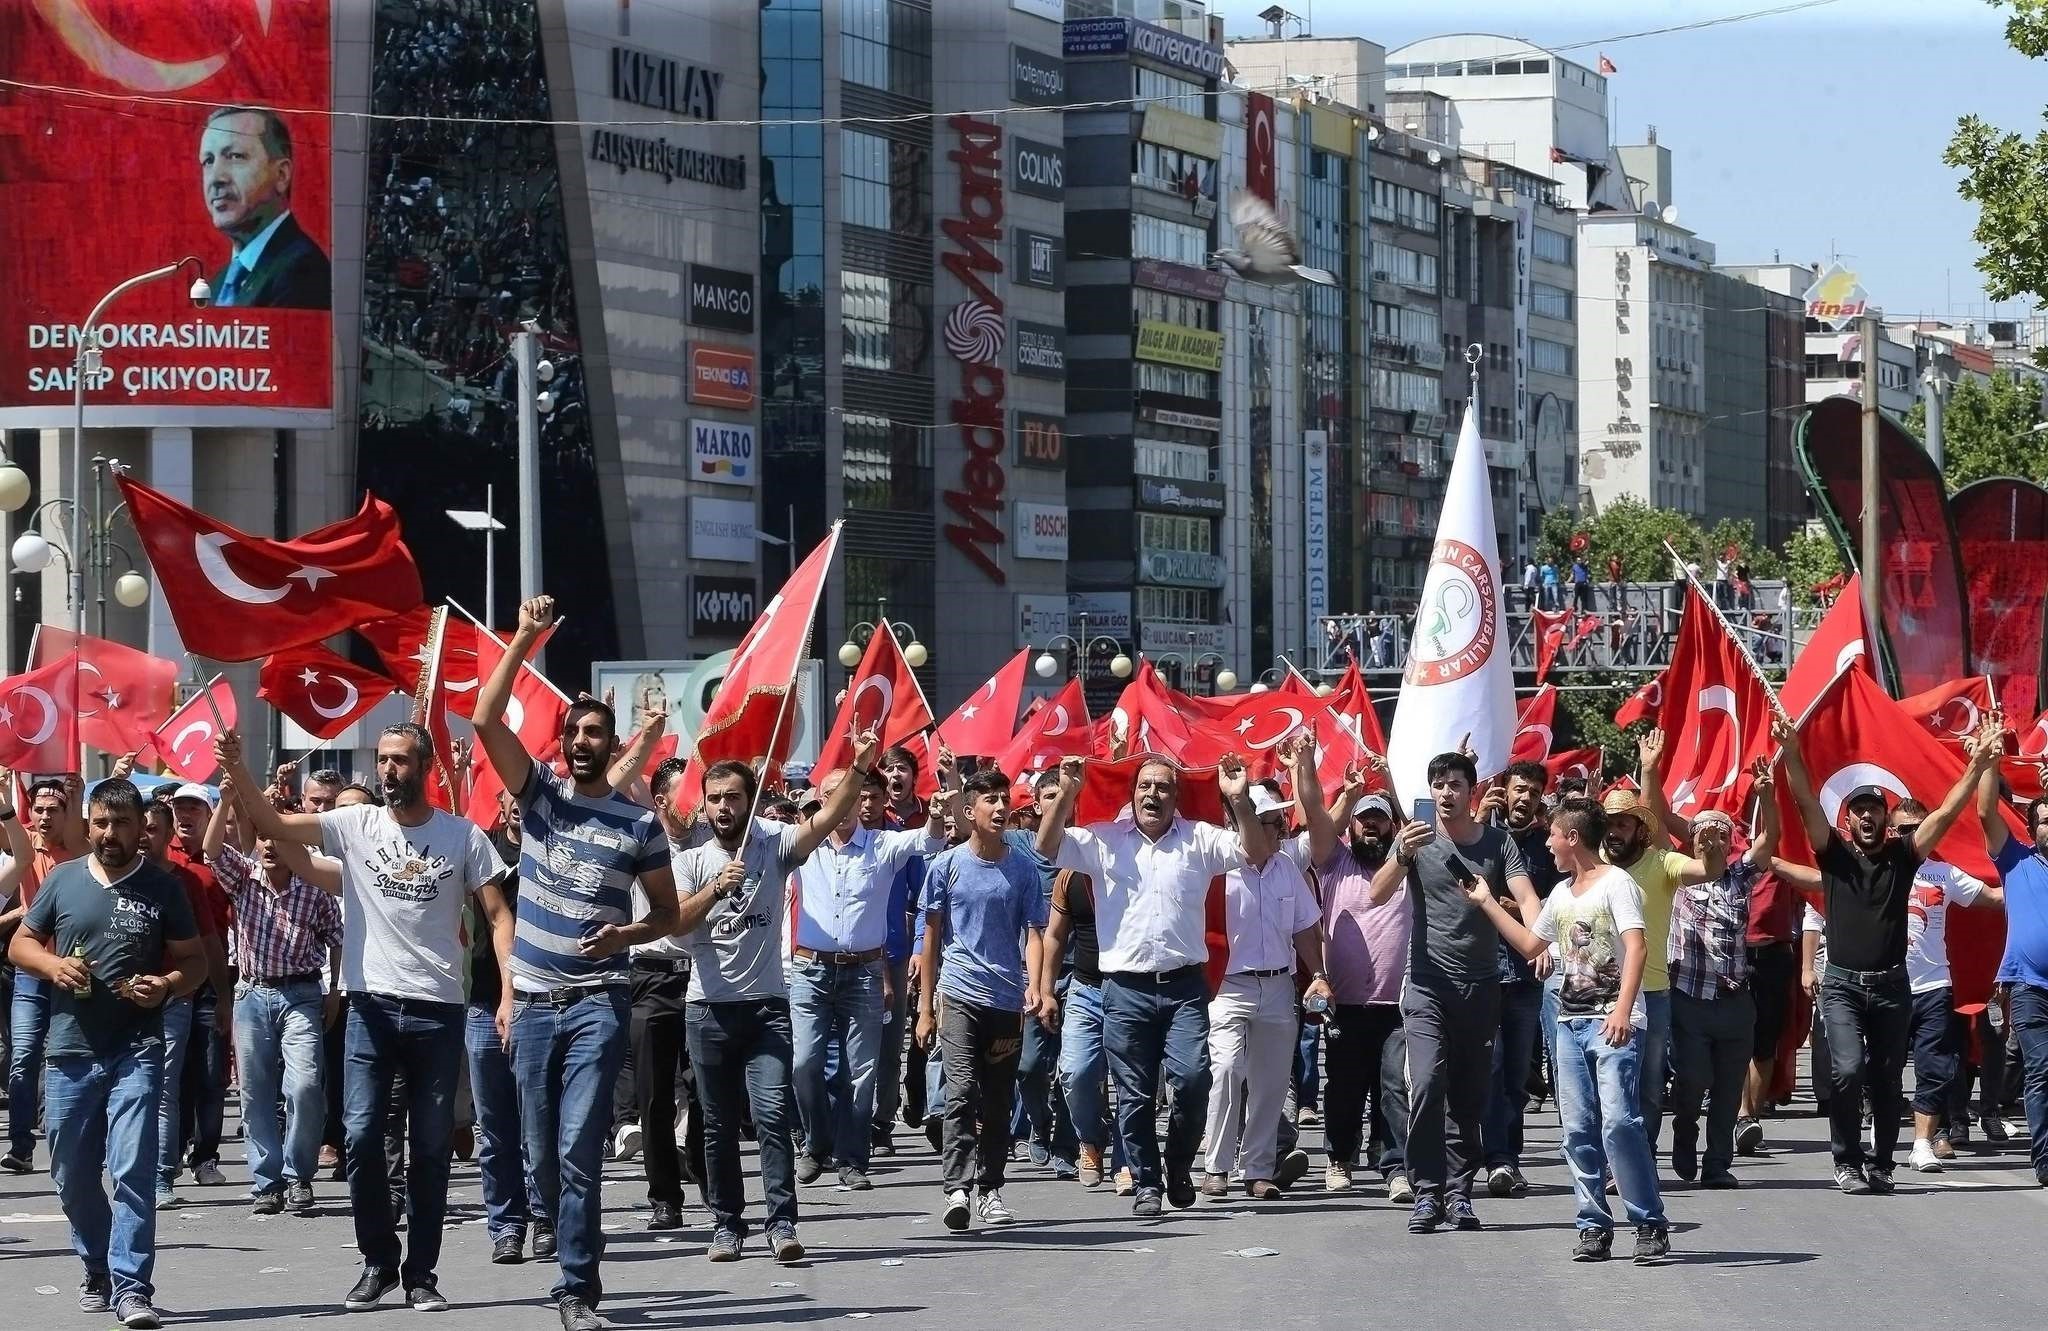  People wave national flags as they march from Kizilay square to Turkish General Staff building to react against military coup attempt, in Ankara, on July 16, 2016.